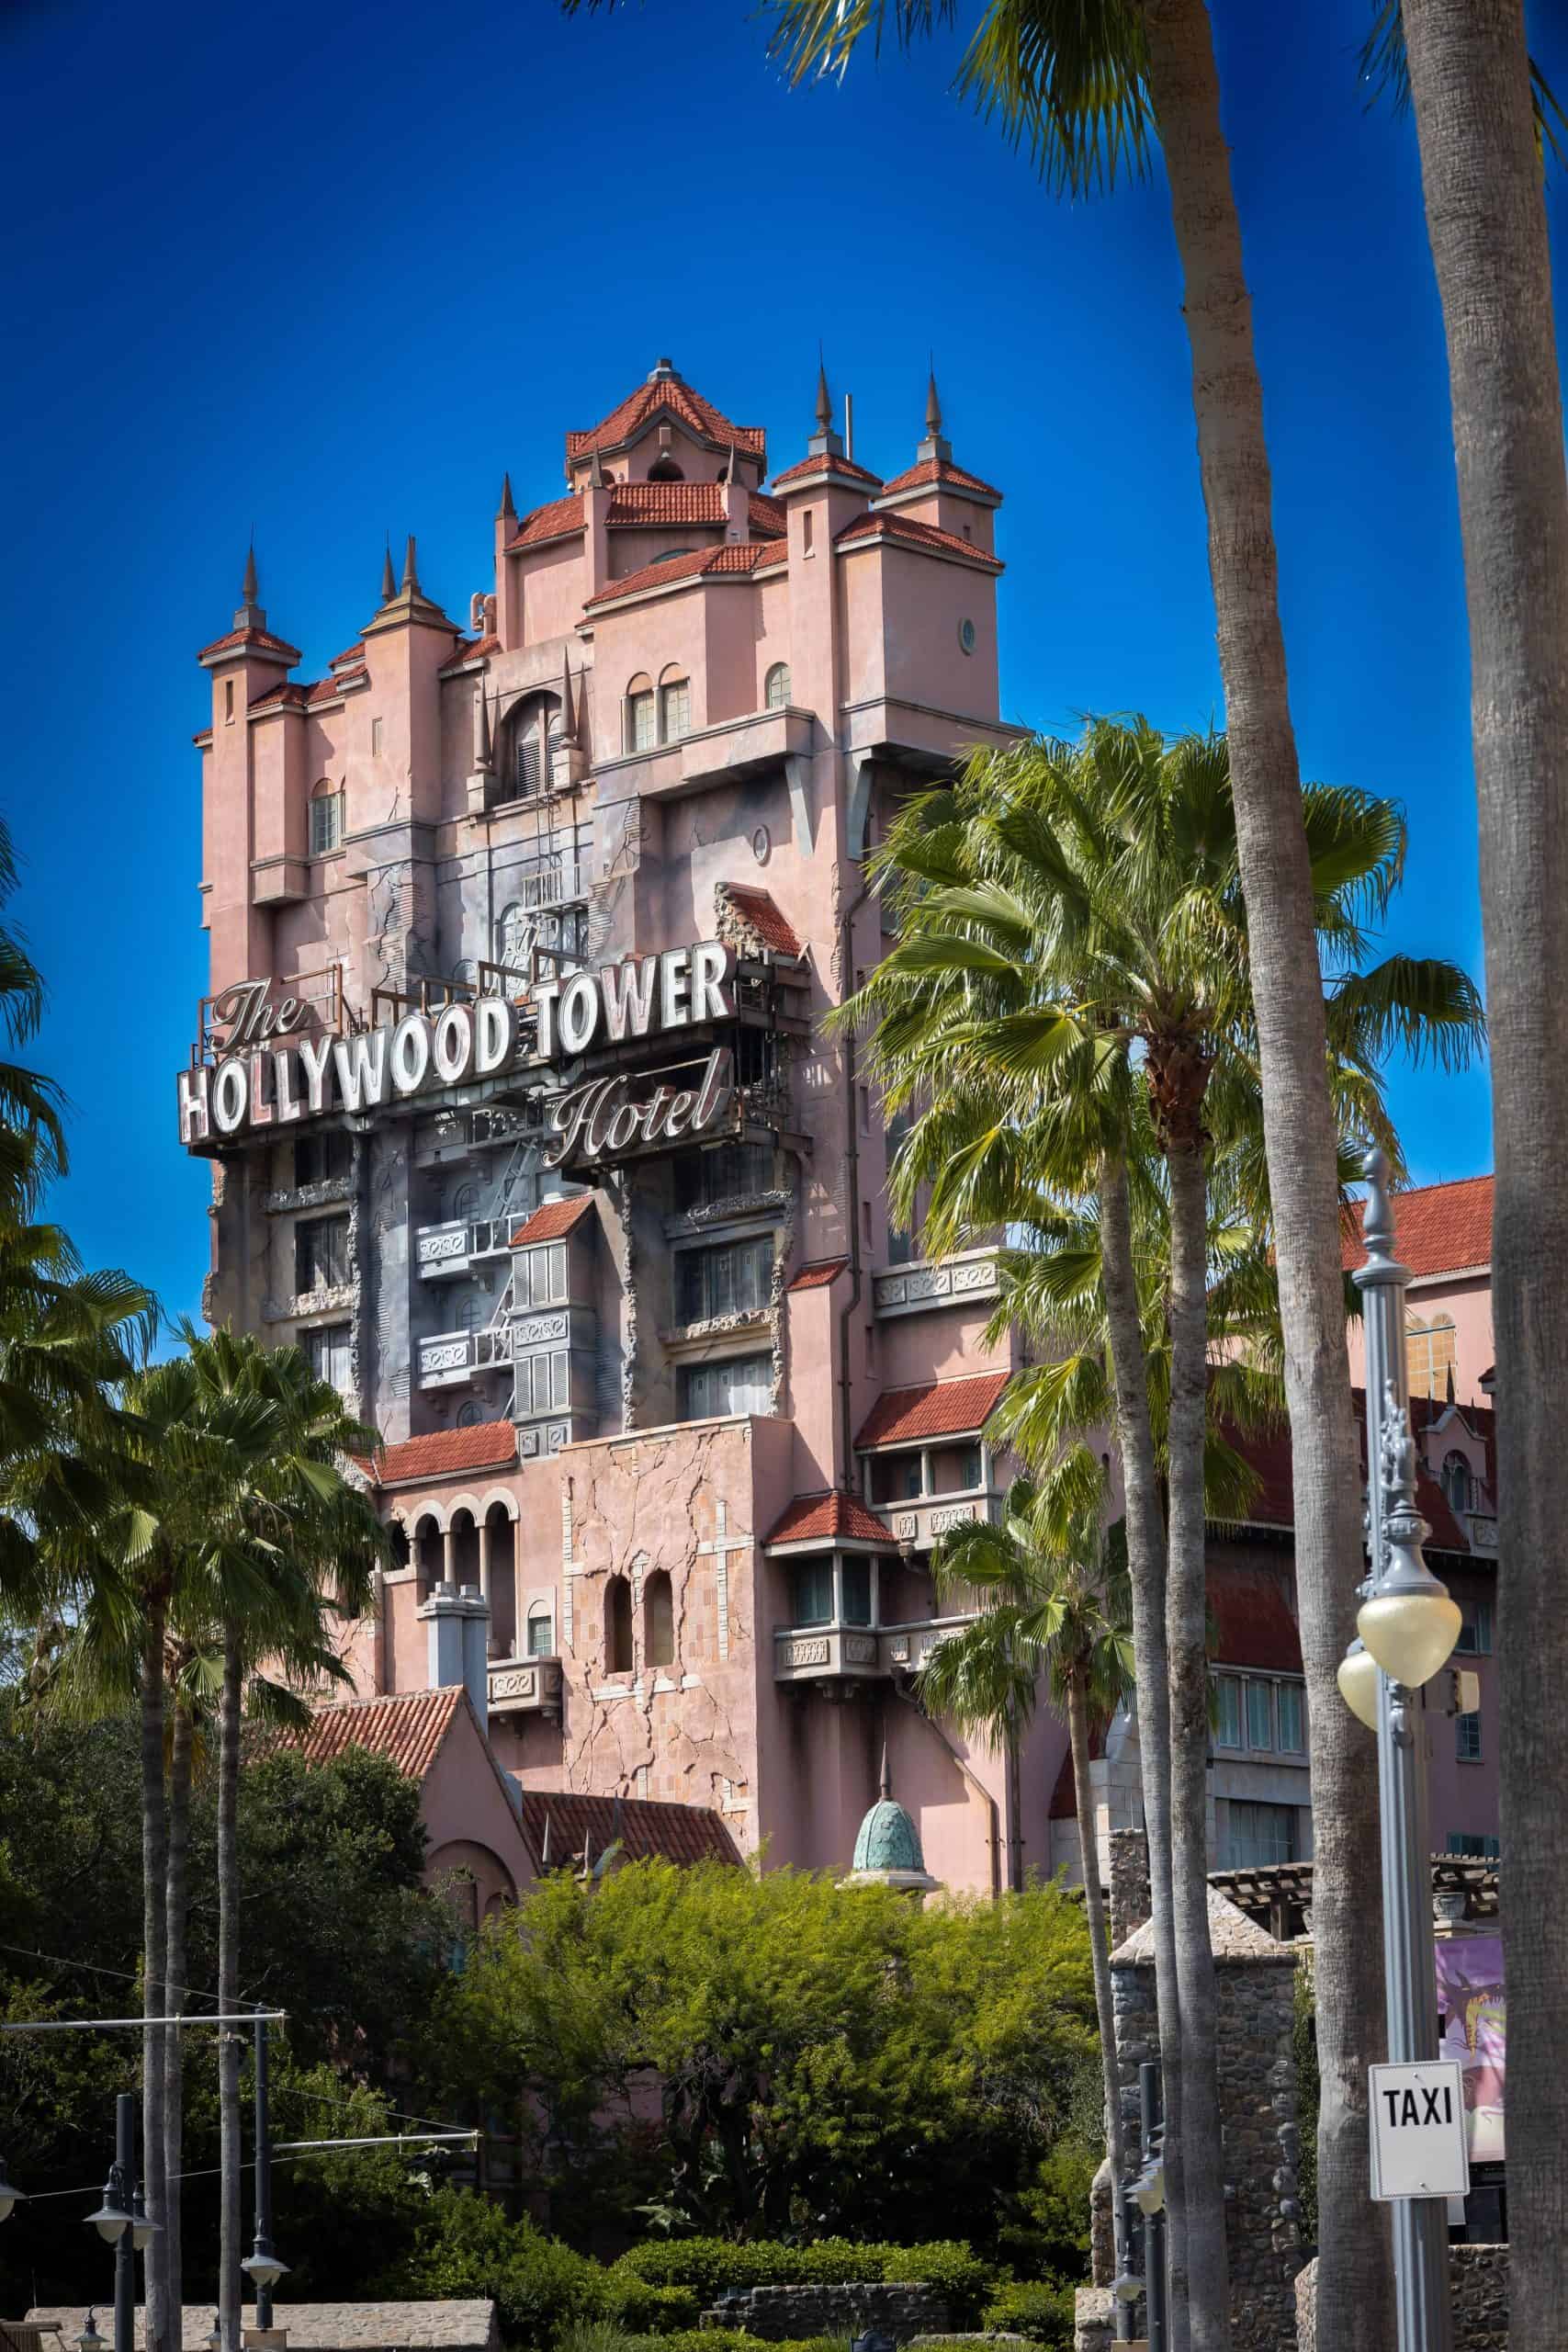 <p>Prepare yourself for the thrill of the Twilight Zone Tower of Terror – if you dare. The thrill ride is considered dark and scary since it's full of big drops. Little kids aren't welcome to experience this ride since it's a lot more haunting than others. It's designed to mimic the infamous Hollywood Tower Hotel that's magically been frozen in time.</p> <p>This is the perfect ride to try out during the Halloween season. Whether it's October or not, the Twilight Zone Tower of Terror will always be a hit. This ride is directly connected to "The Twilight Zone" TV show. As a reminder, "The Twilight Zone" ran for five season starting in 1959 telling horror stories mixed with science fiction, comedy, drama, and superstition.</p>